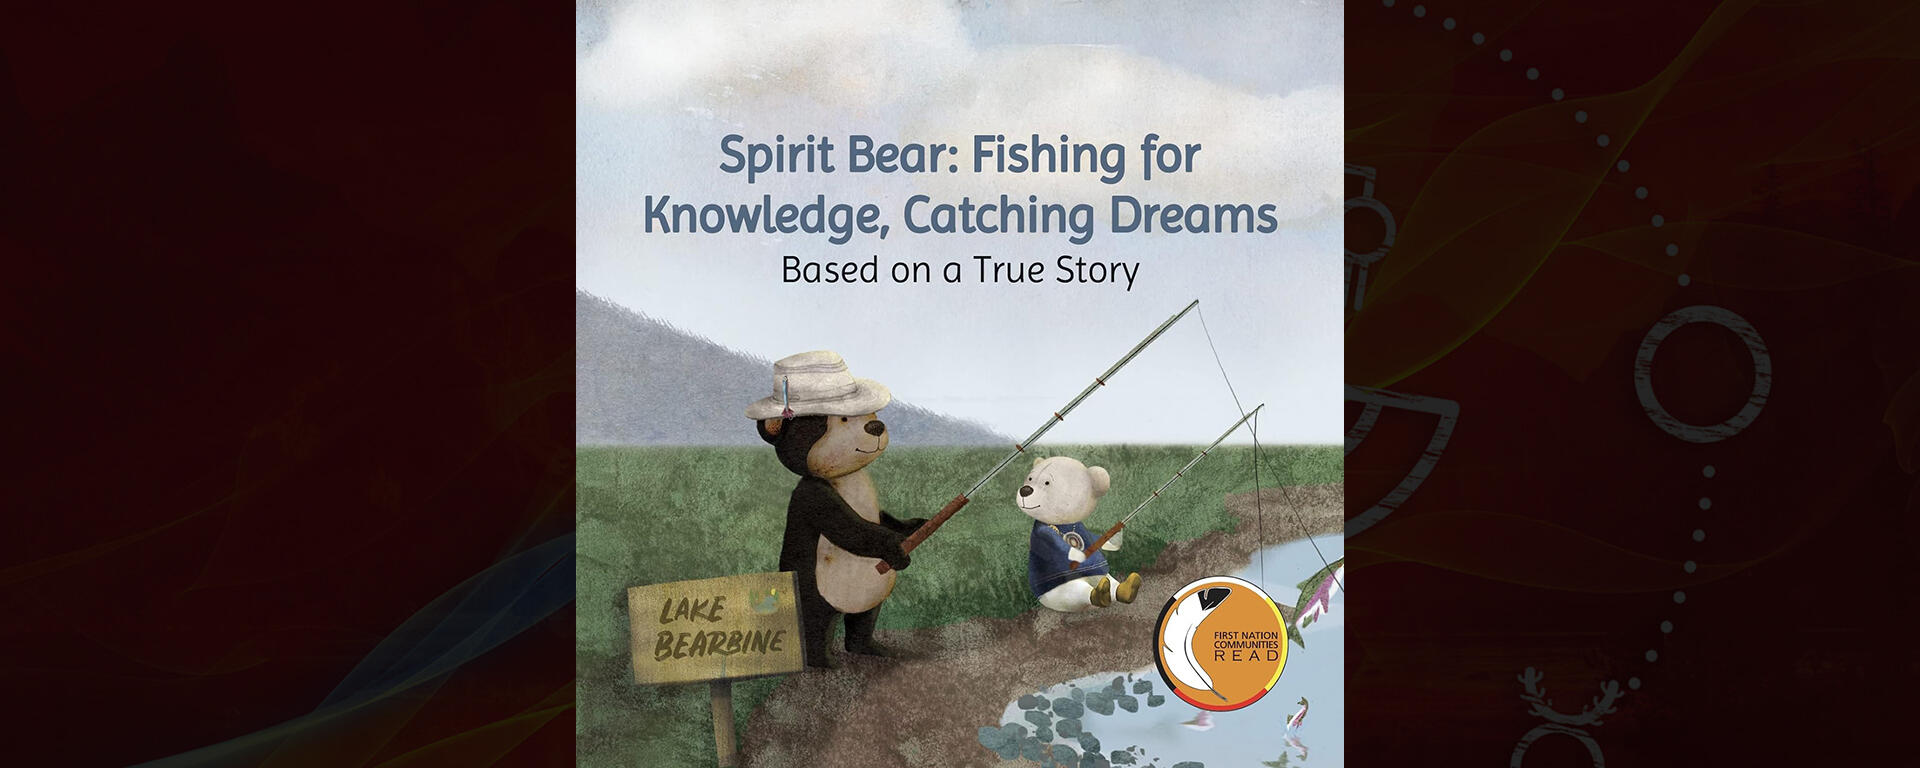 Spirit Bear: Fishing for Knowledge, Catching Dreams: Based on a True Story